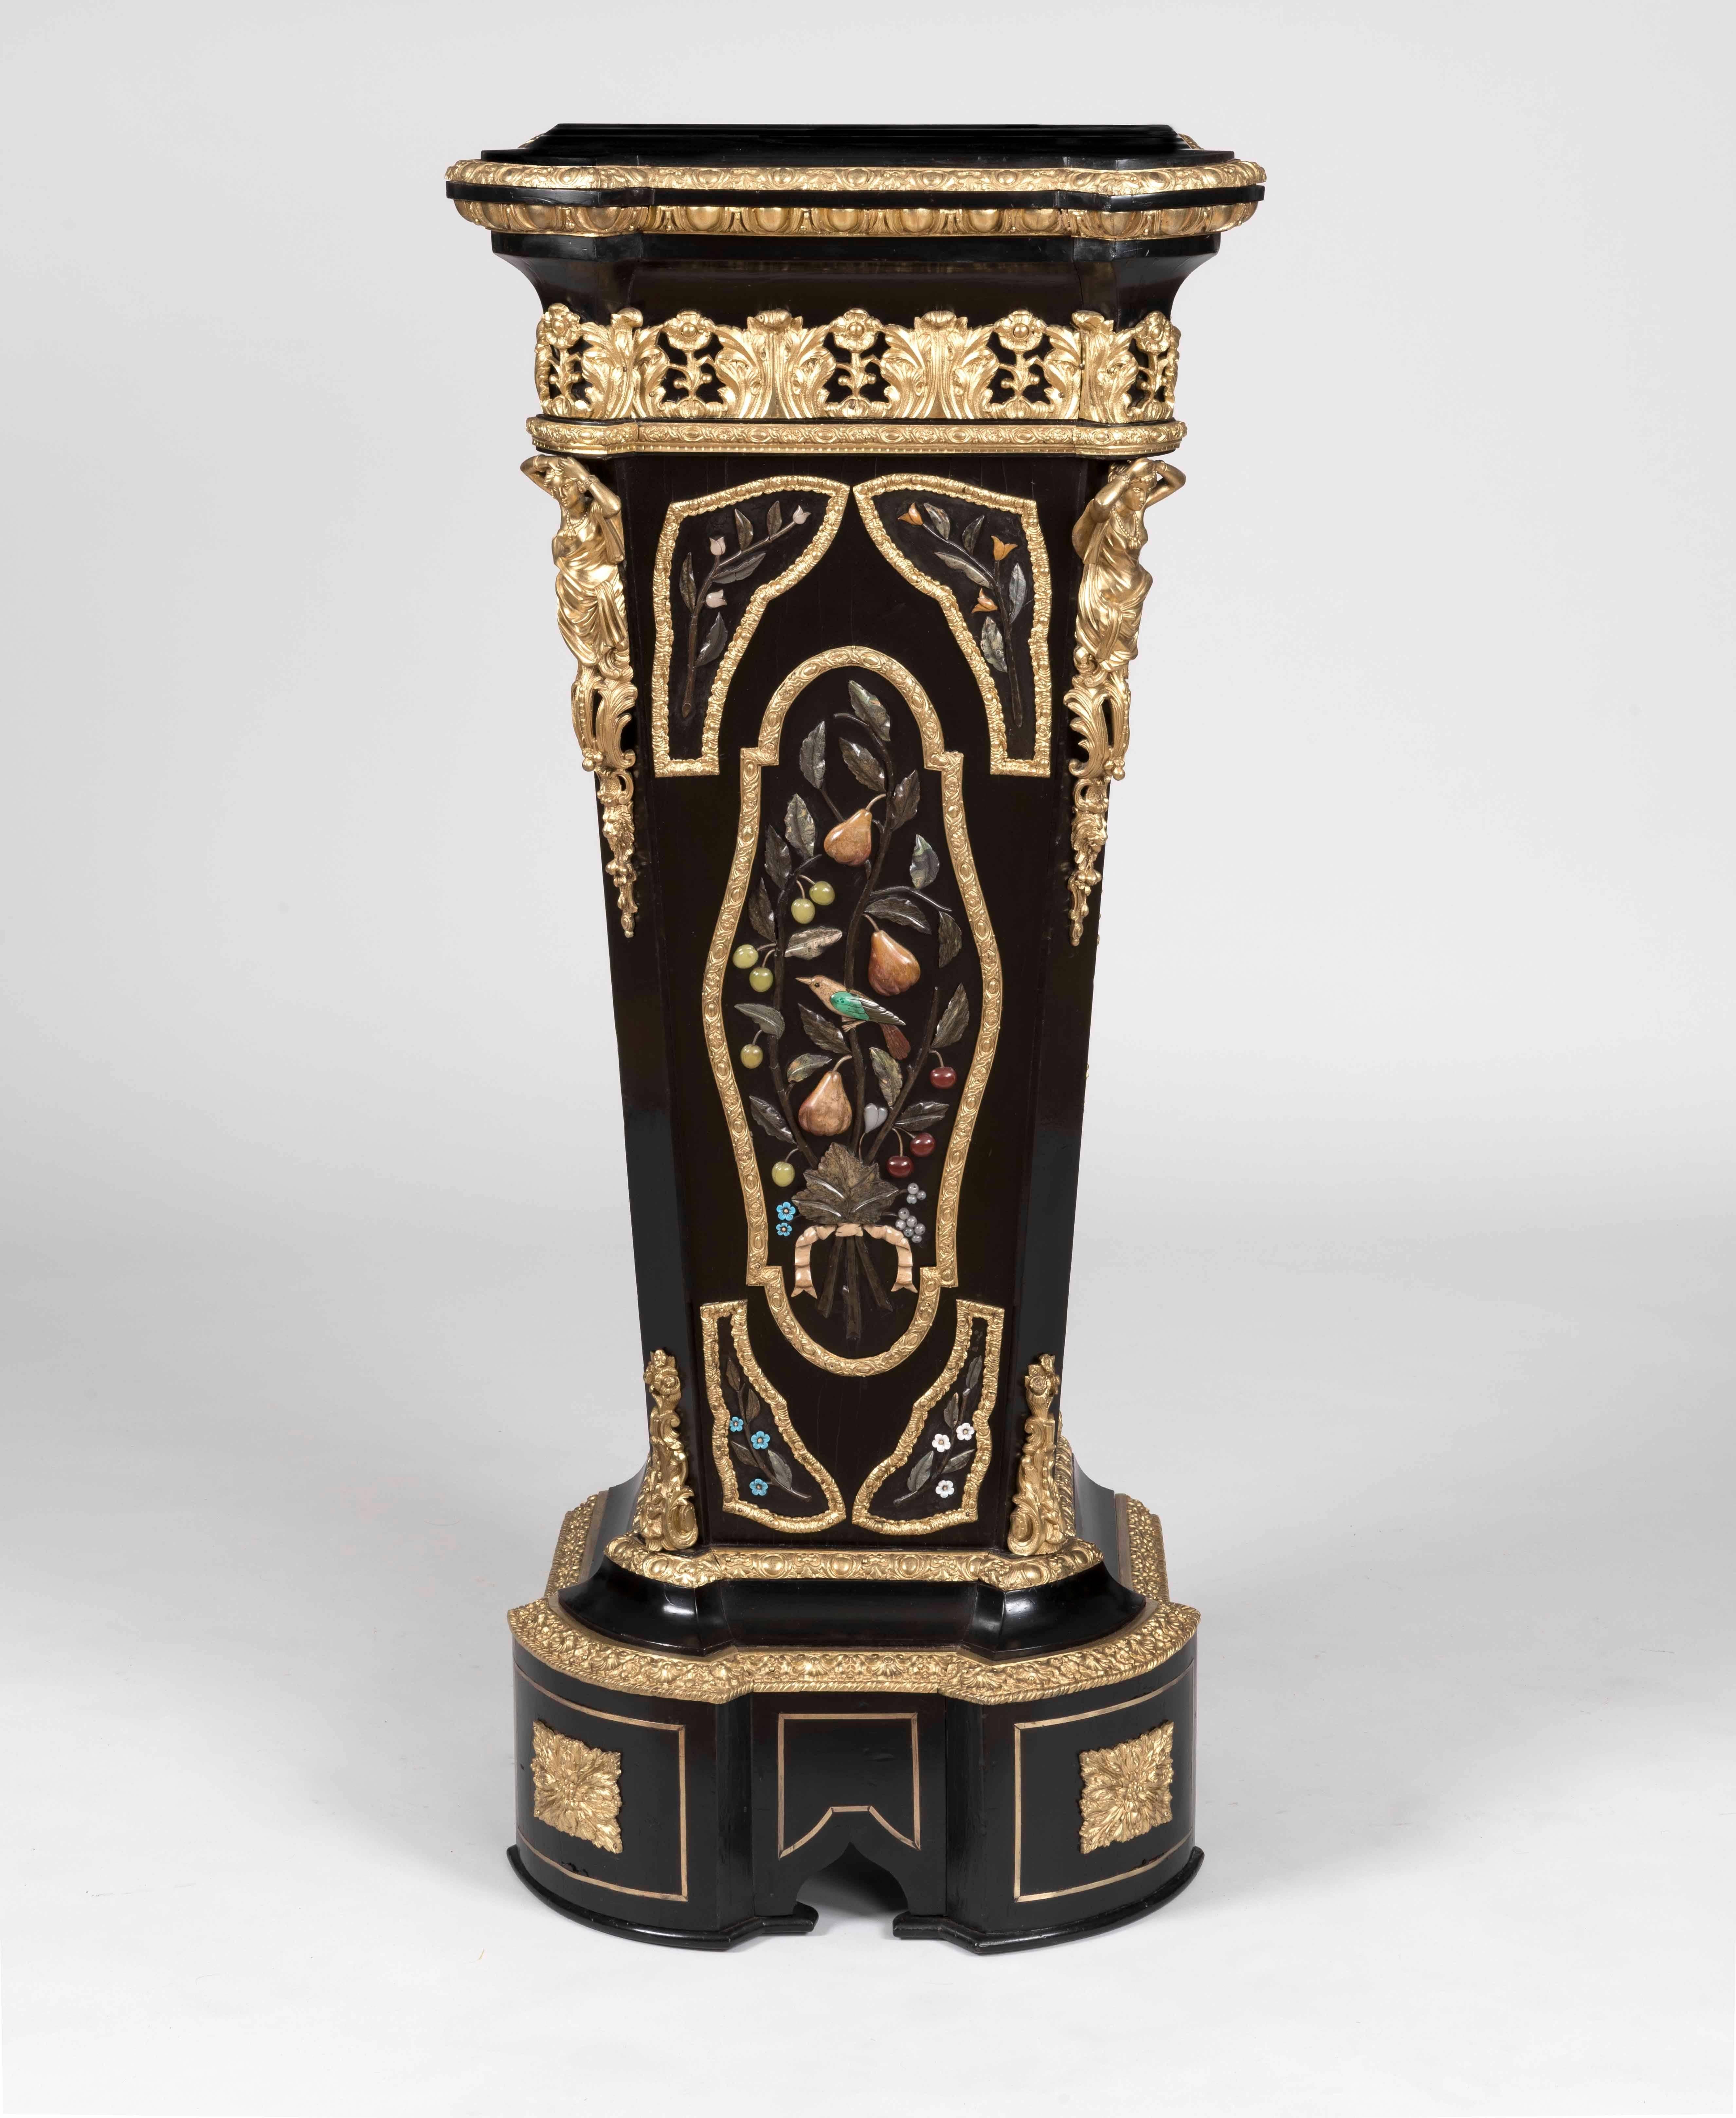 A pair of pedestals in the manner of Befort Fils of Paris

Constructed in bois noirci, dressed with gilt bronzes, and hardstone inlays; rising from incurved serpentine stepped bases, the inverted tapering columns having central hardstone panels